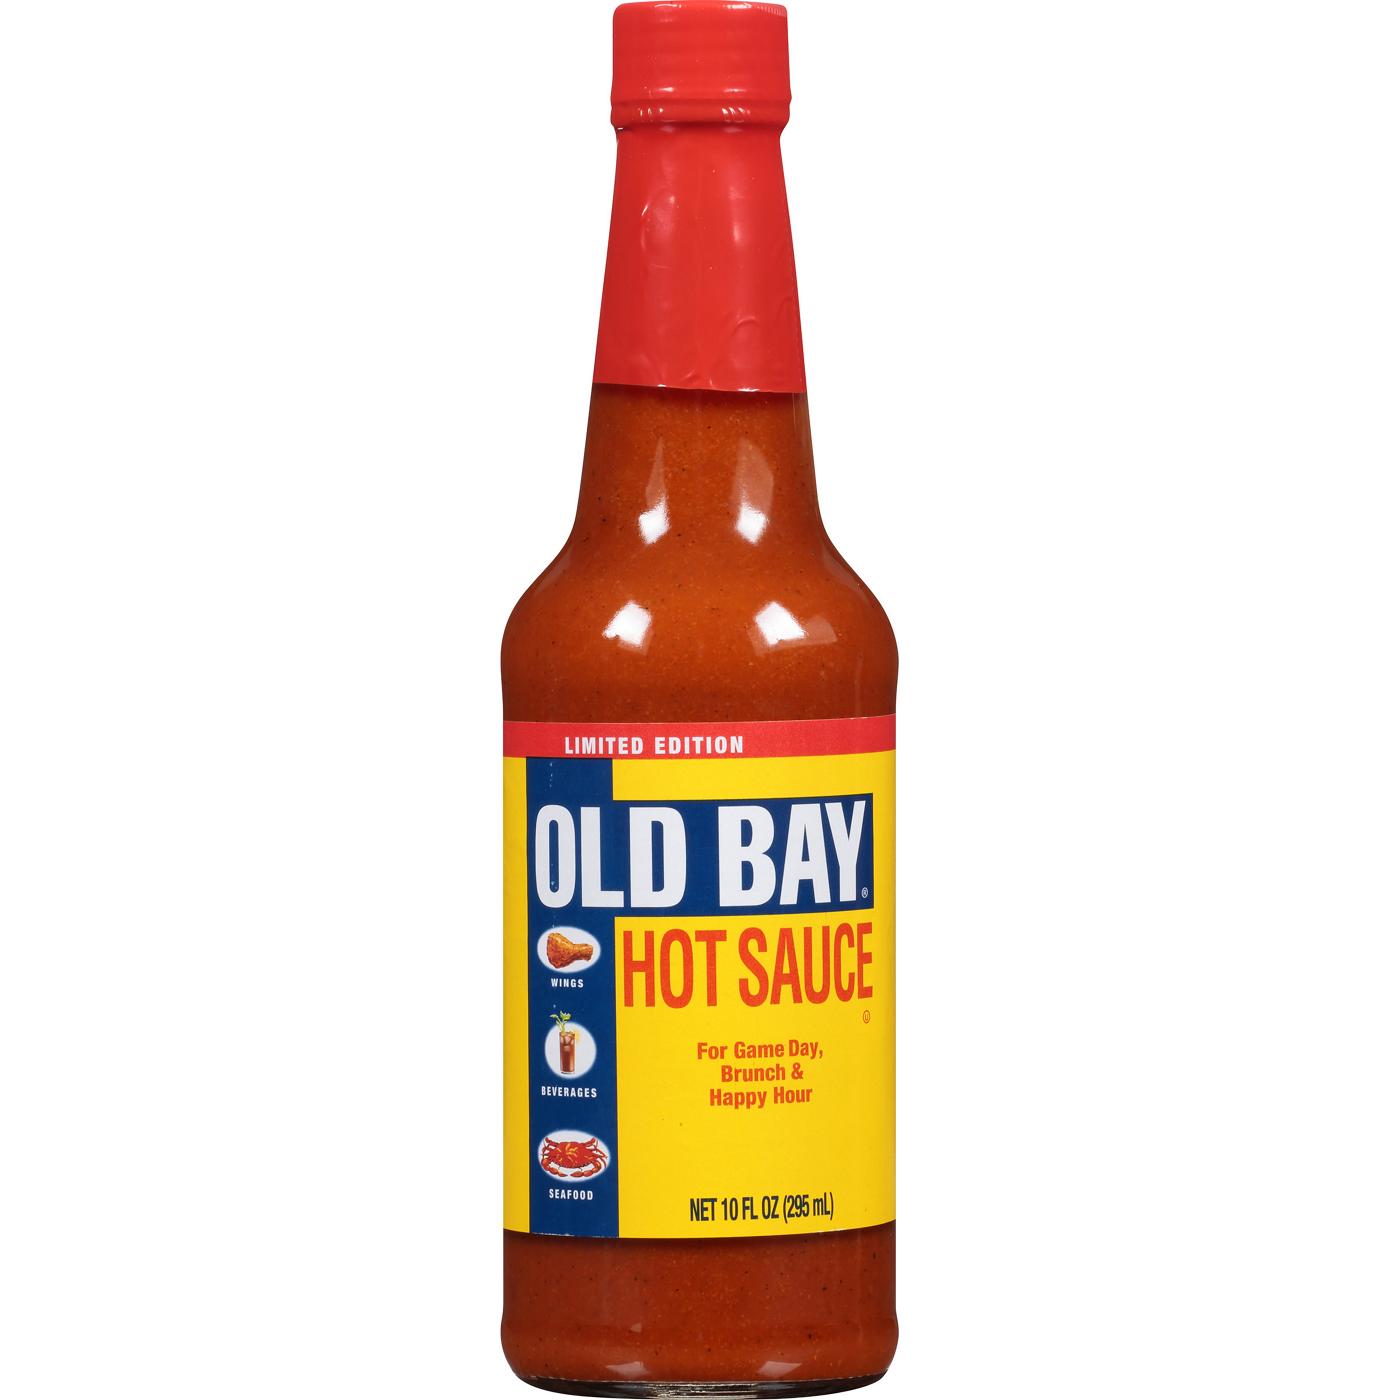 Old Bay Hot Sauce; image 1 of 5